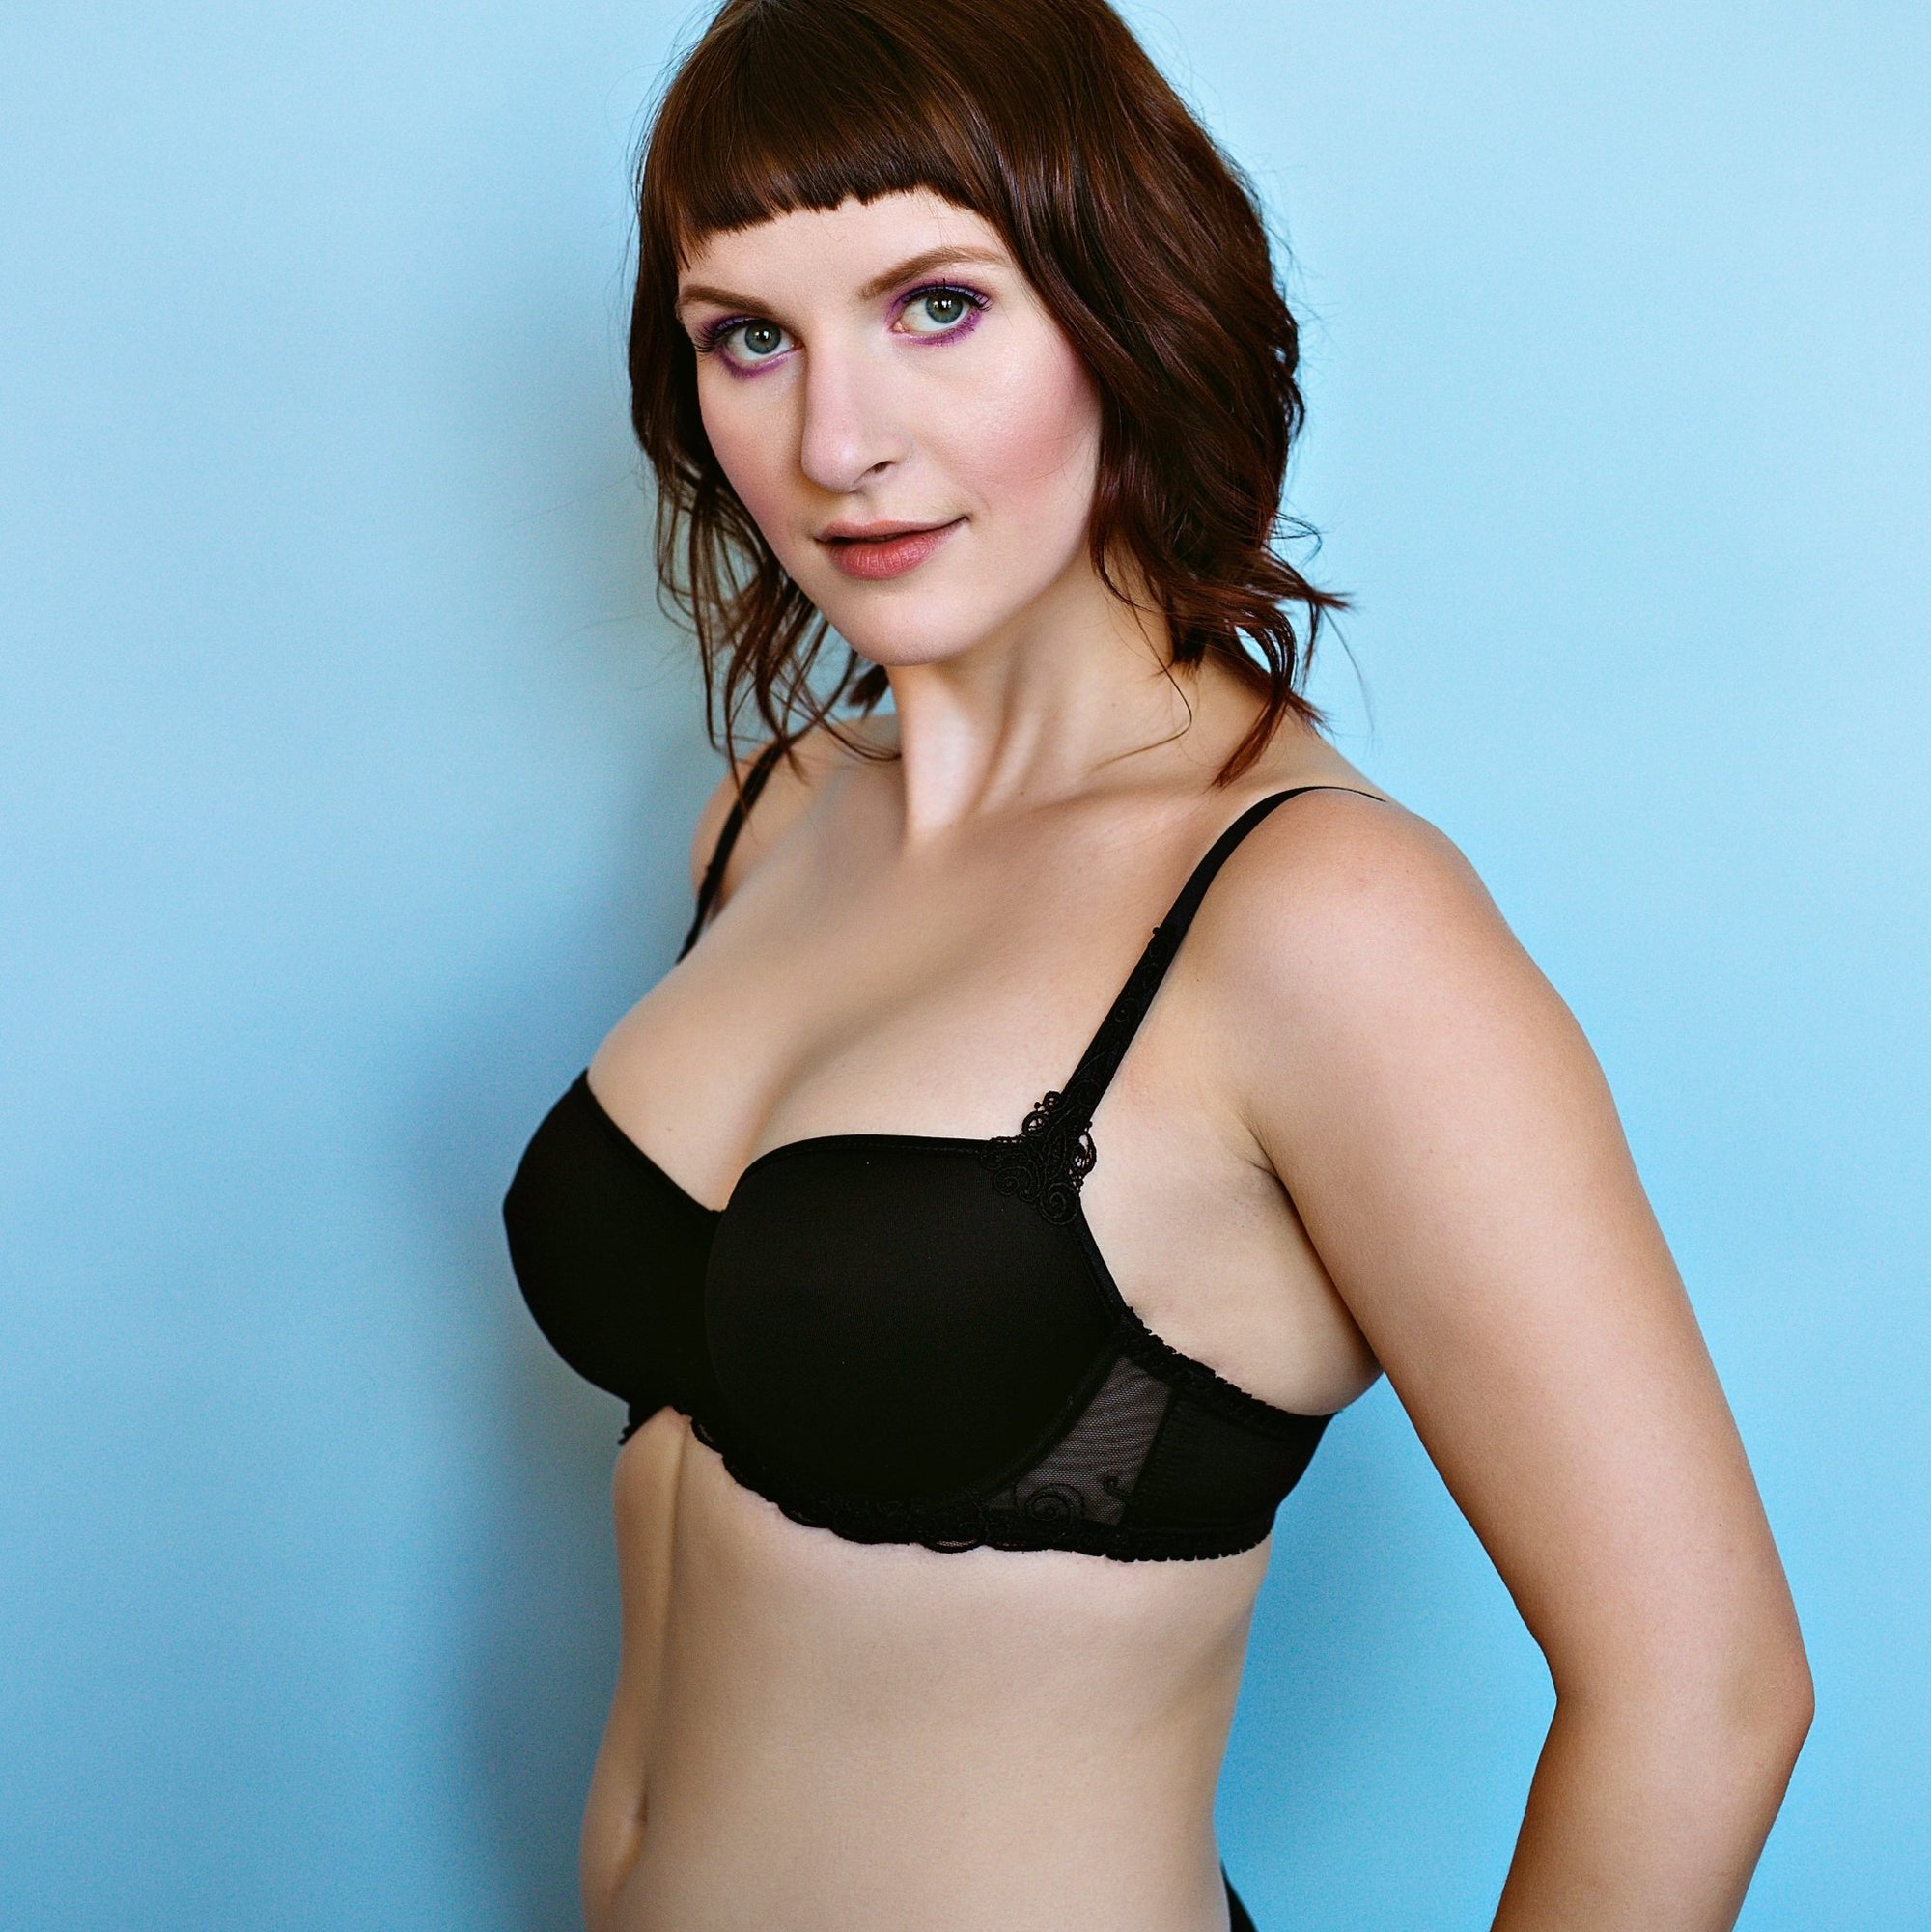 Buy Yours Curve Red Beau Longline Padded Bra from Next Canada